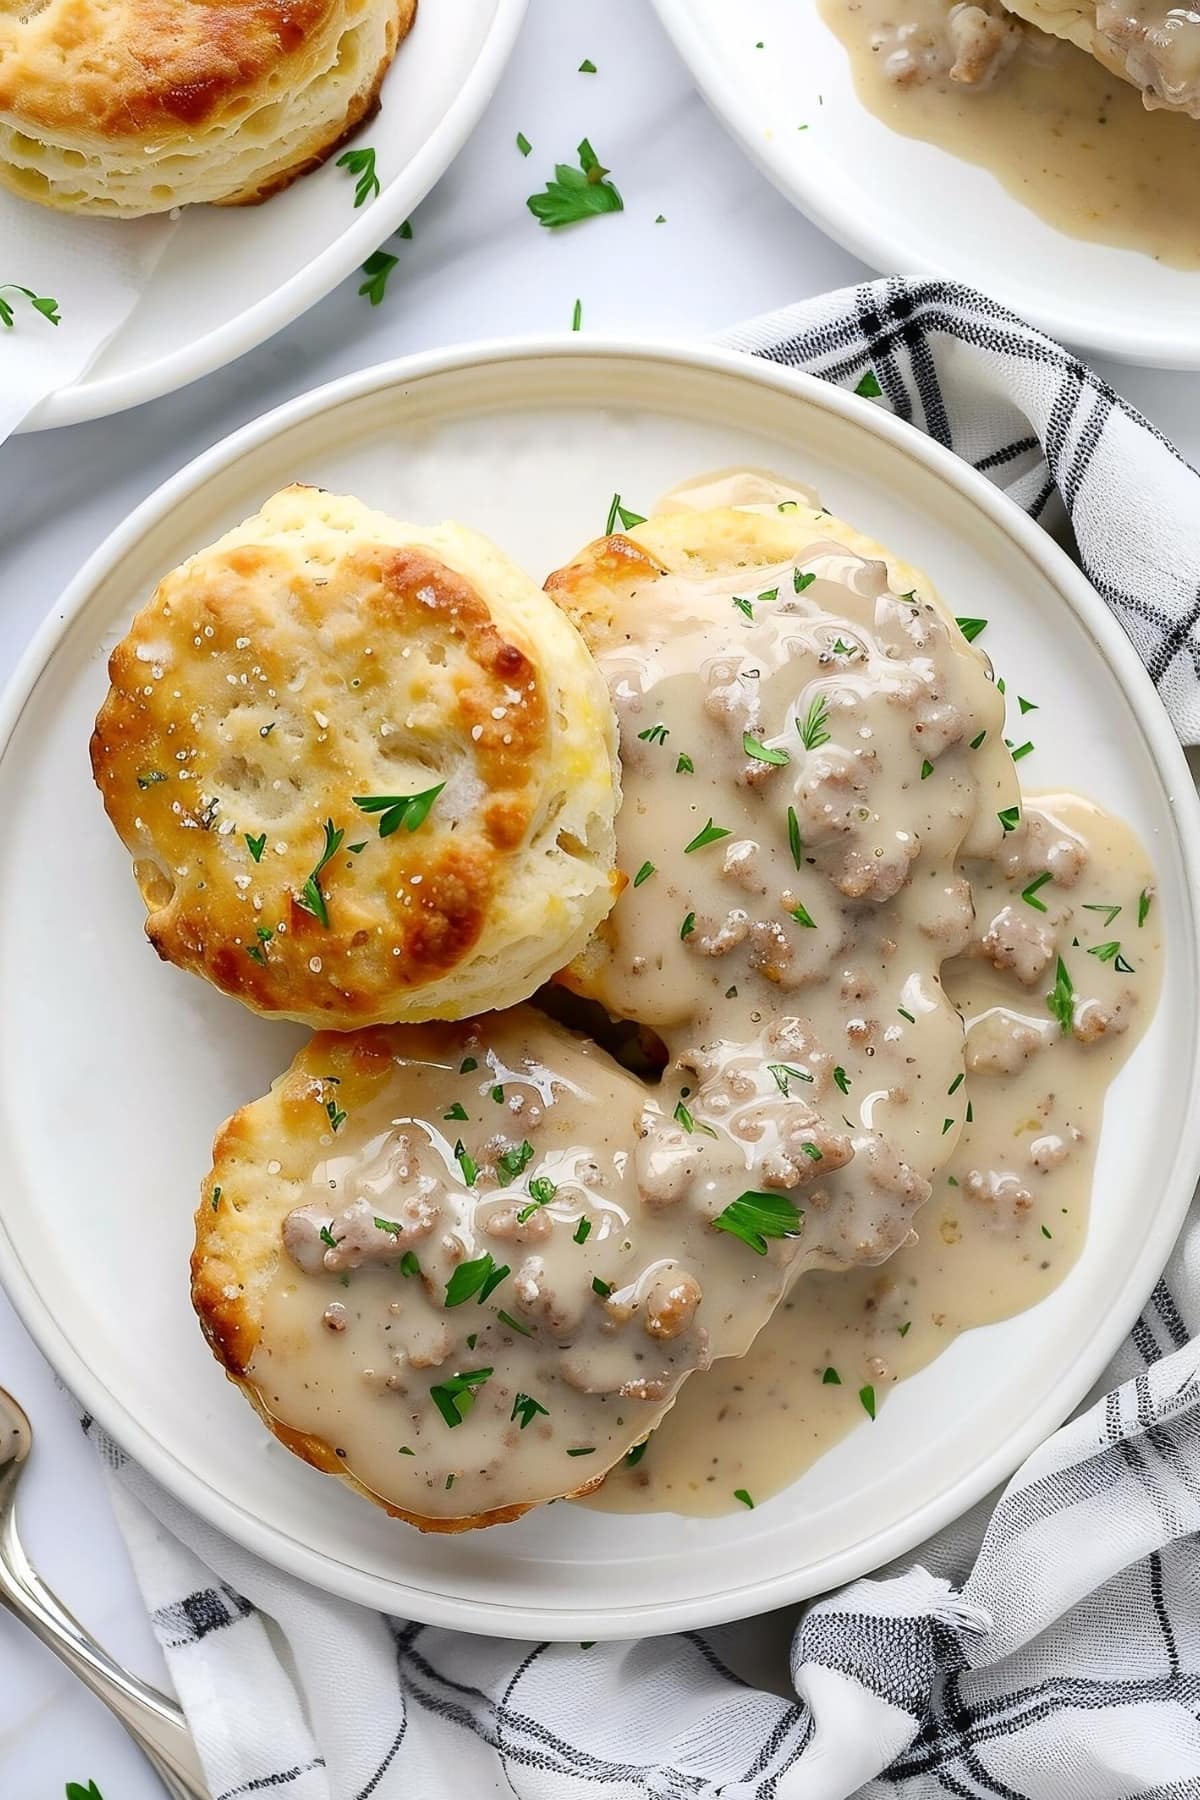 Homemade savory biscuits with sausage gravy